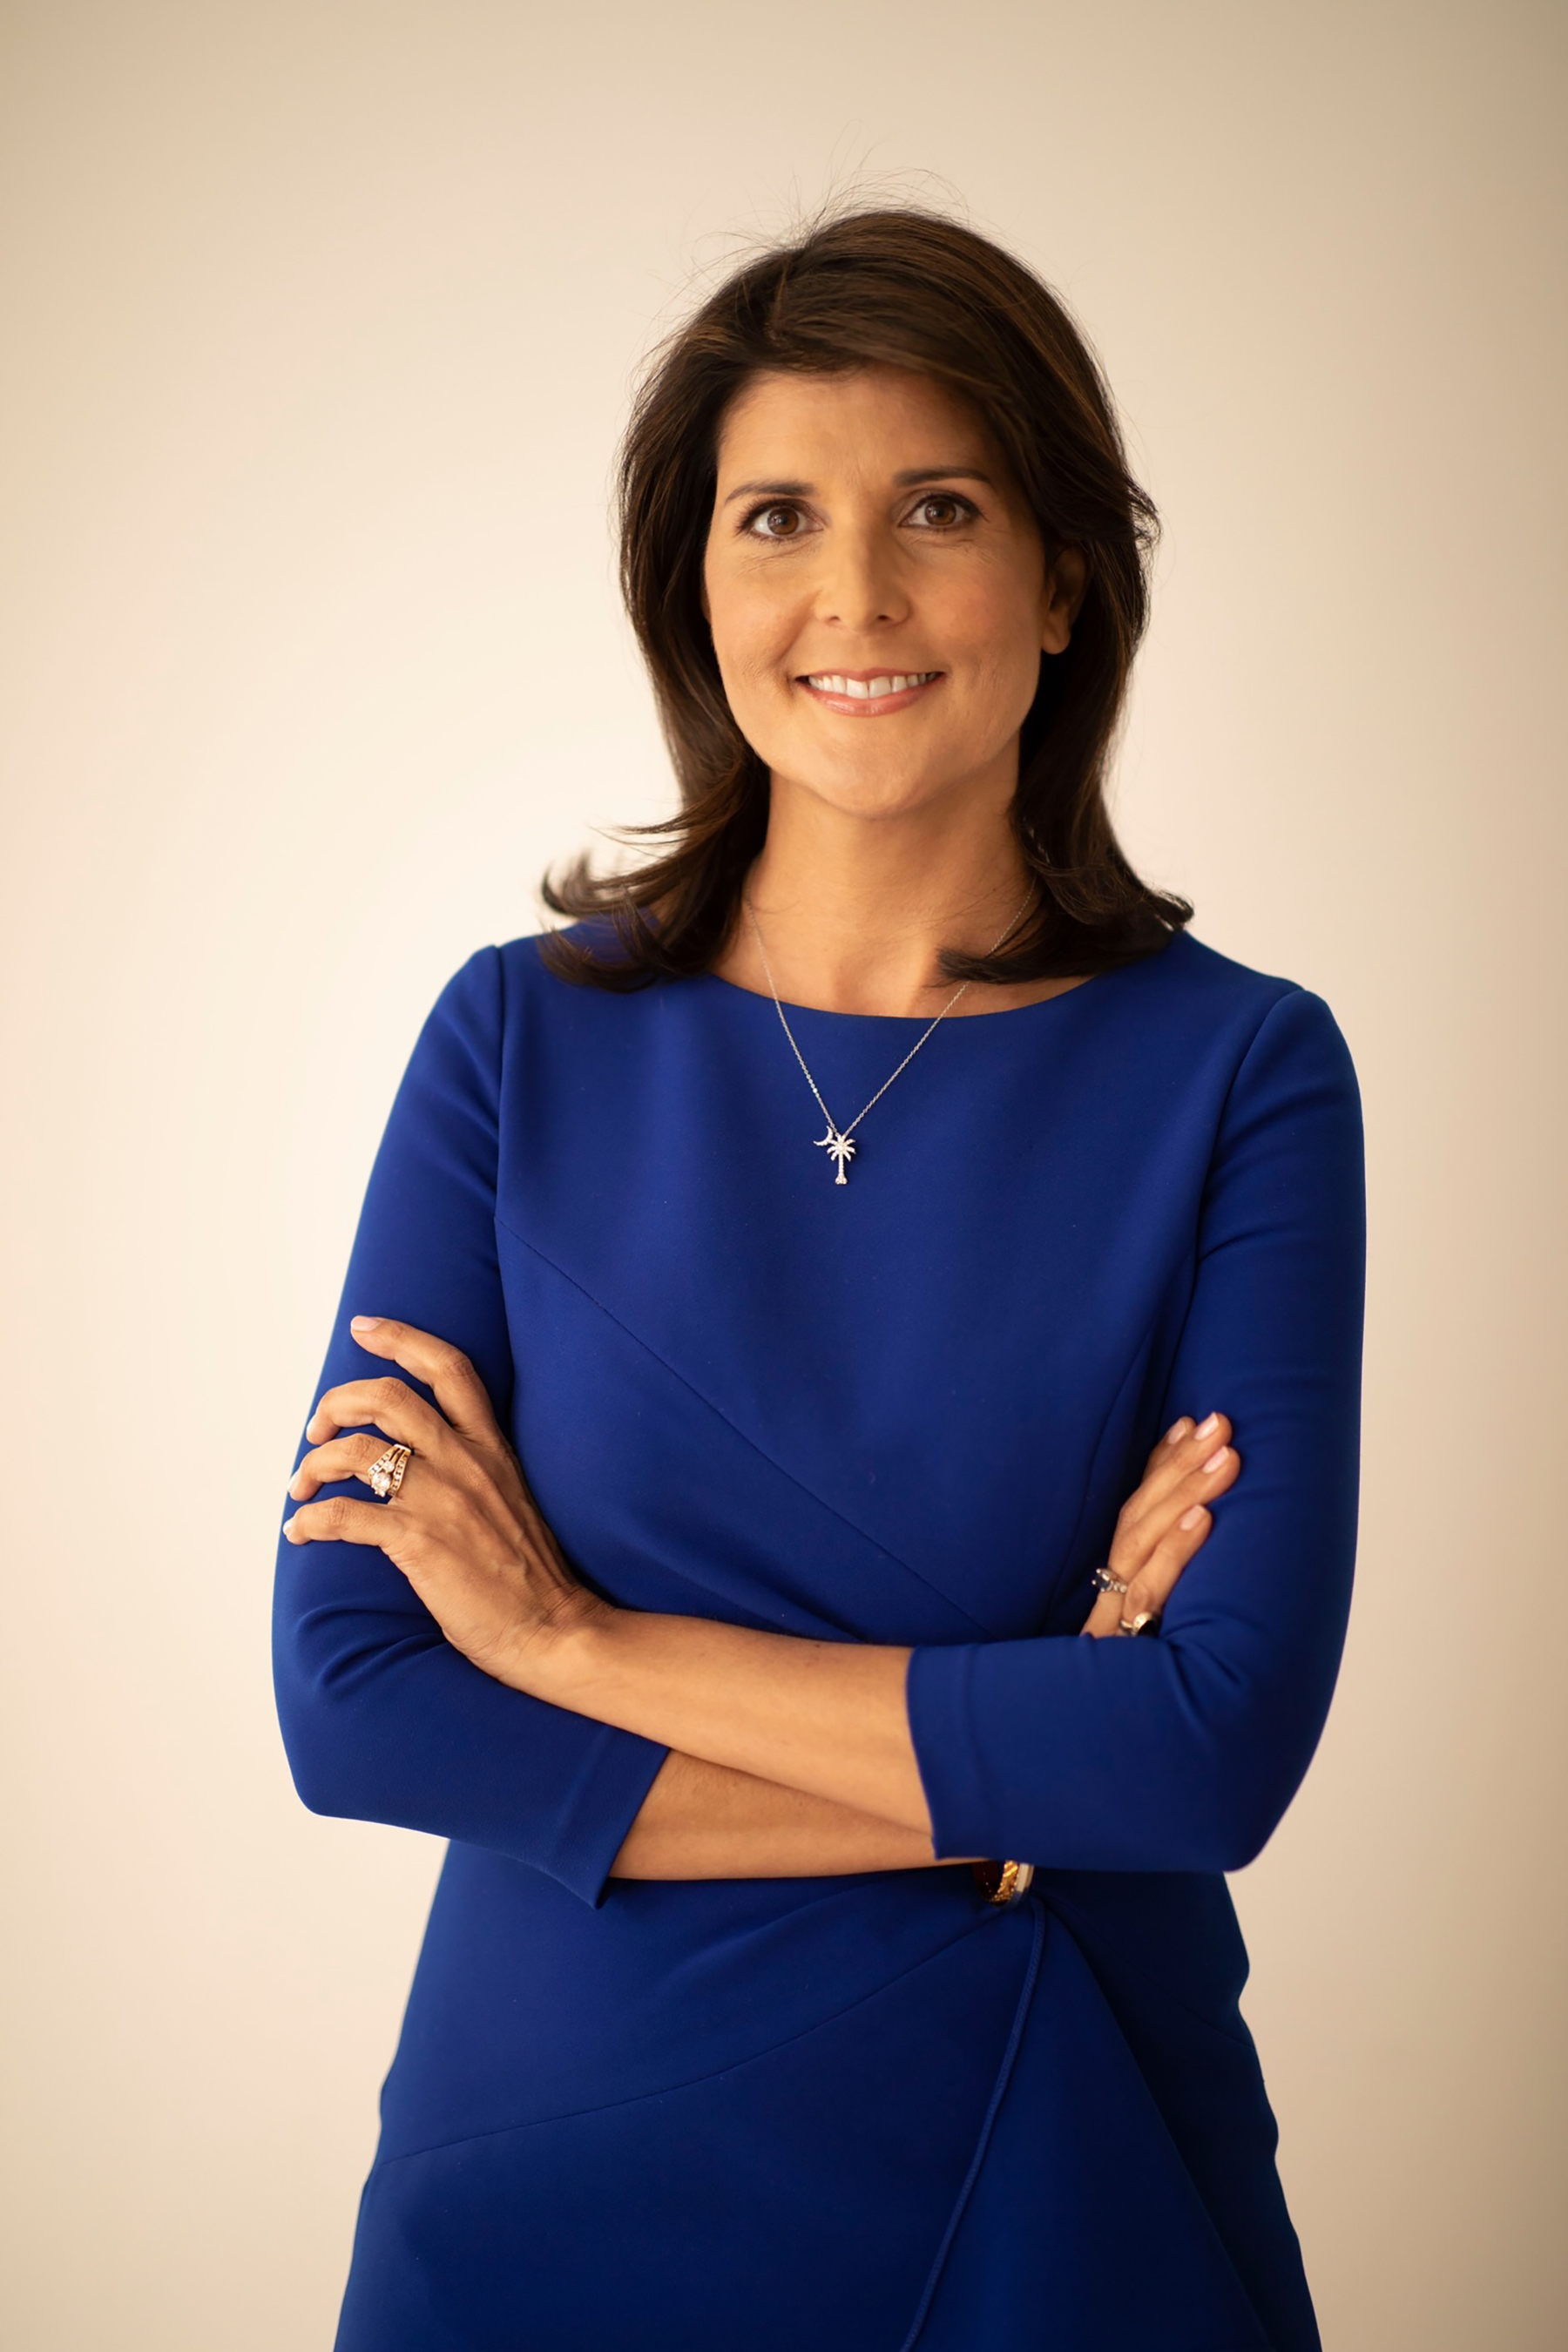 “As a proud military spouse, I know that the men and women of our military are our greatest treasure,” said Amb. Nikki Haley. “Thanks to their service and sacrifice we can live in the greatest country in the world.”